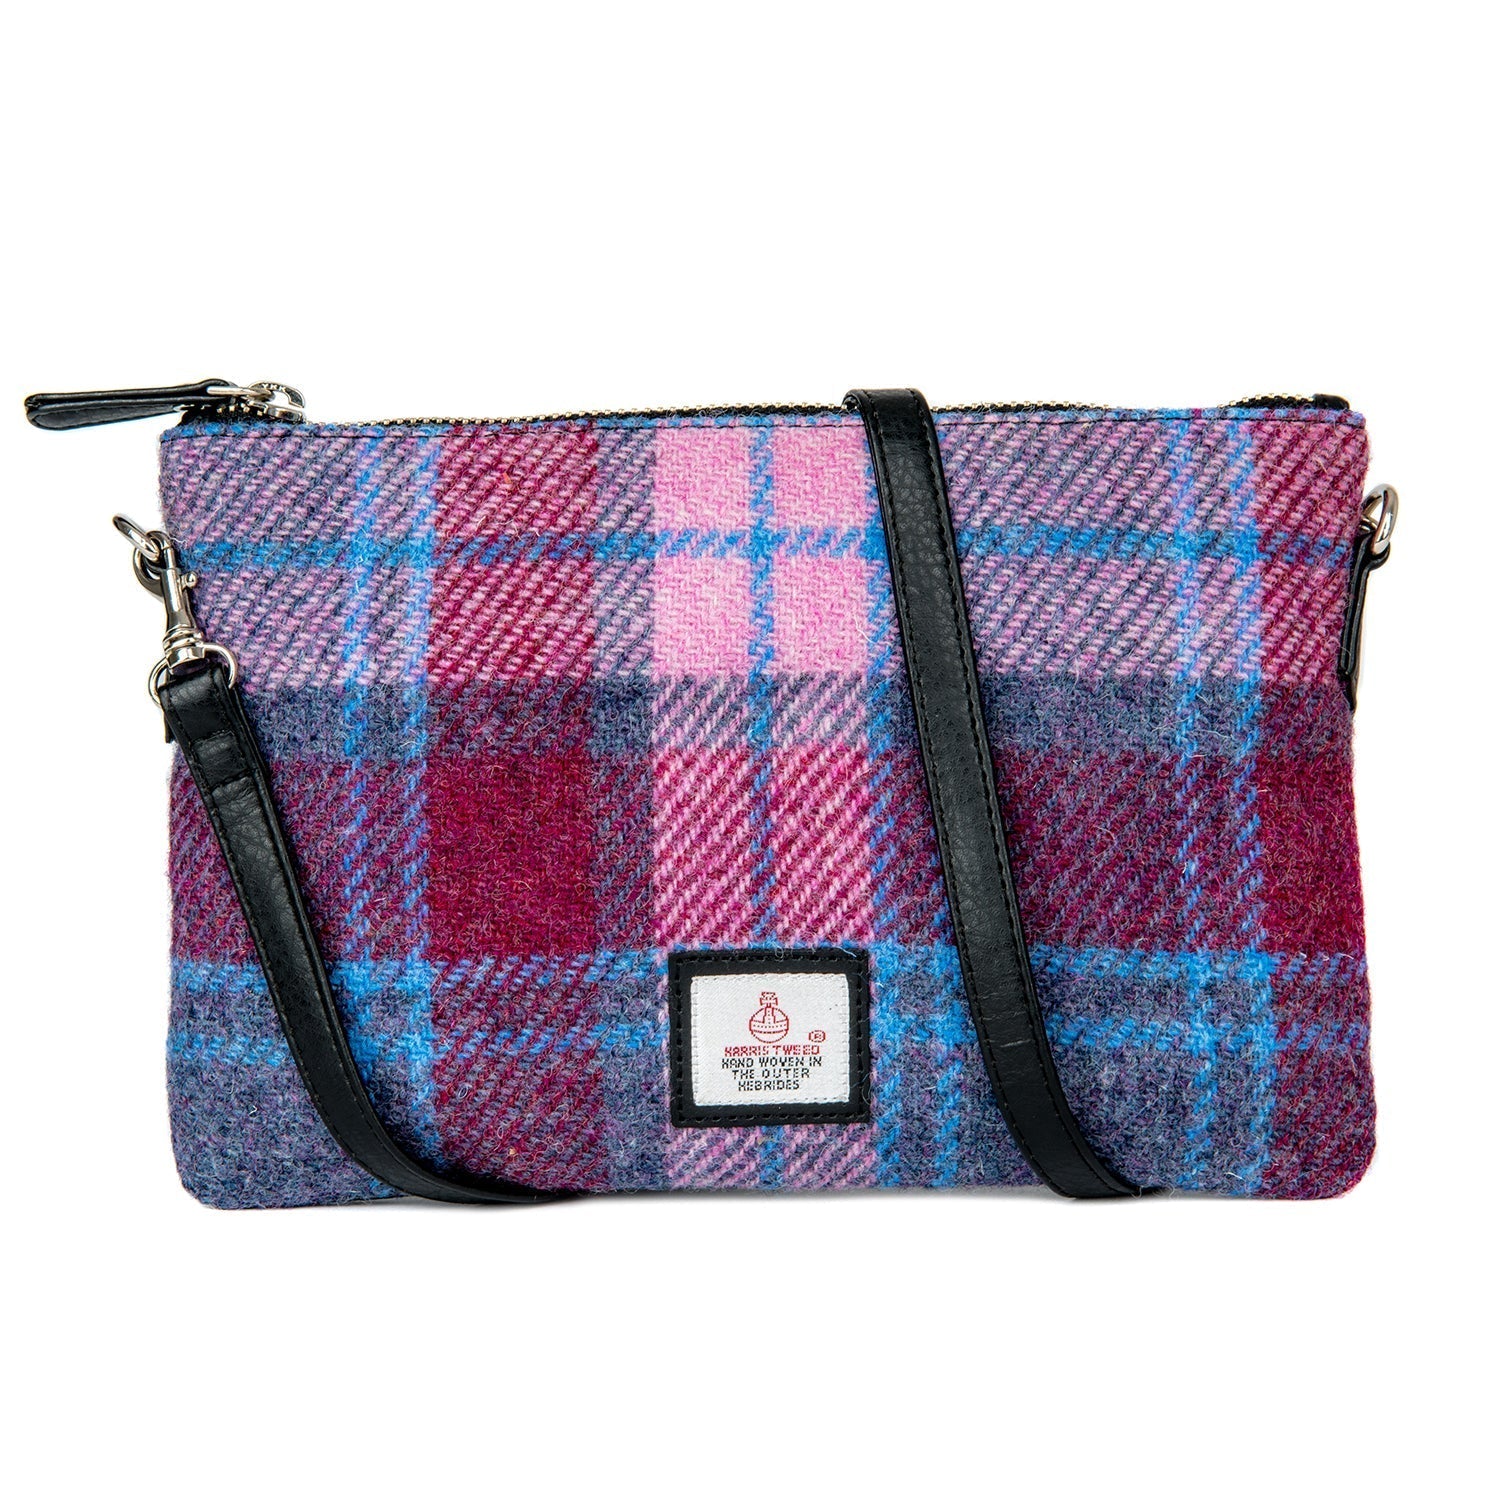 Shop The Tartan Collection - Luxury Bags & Goods